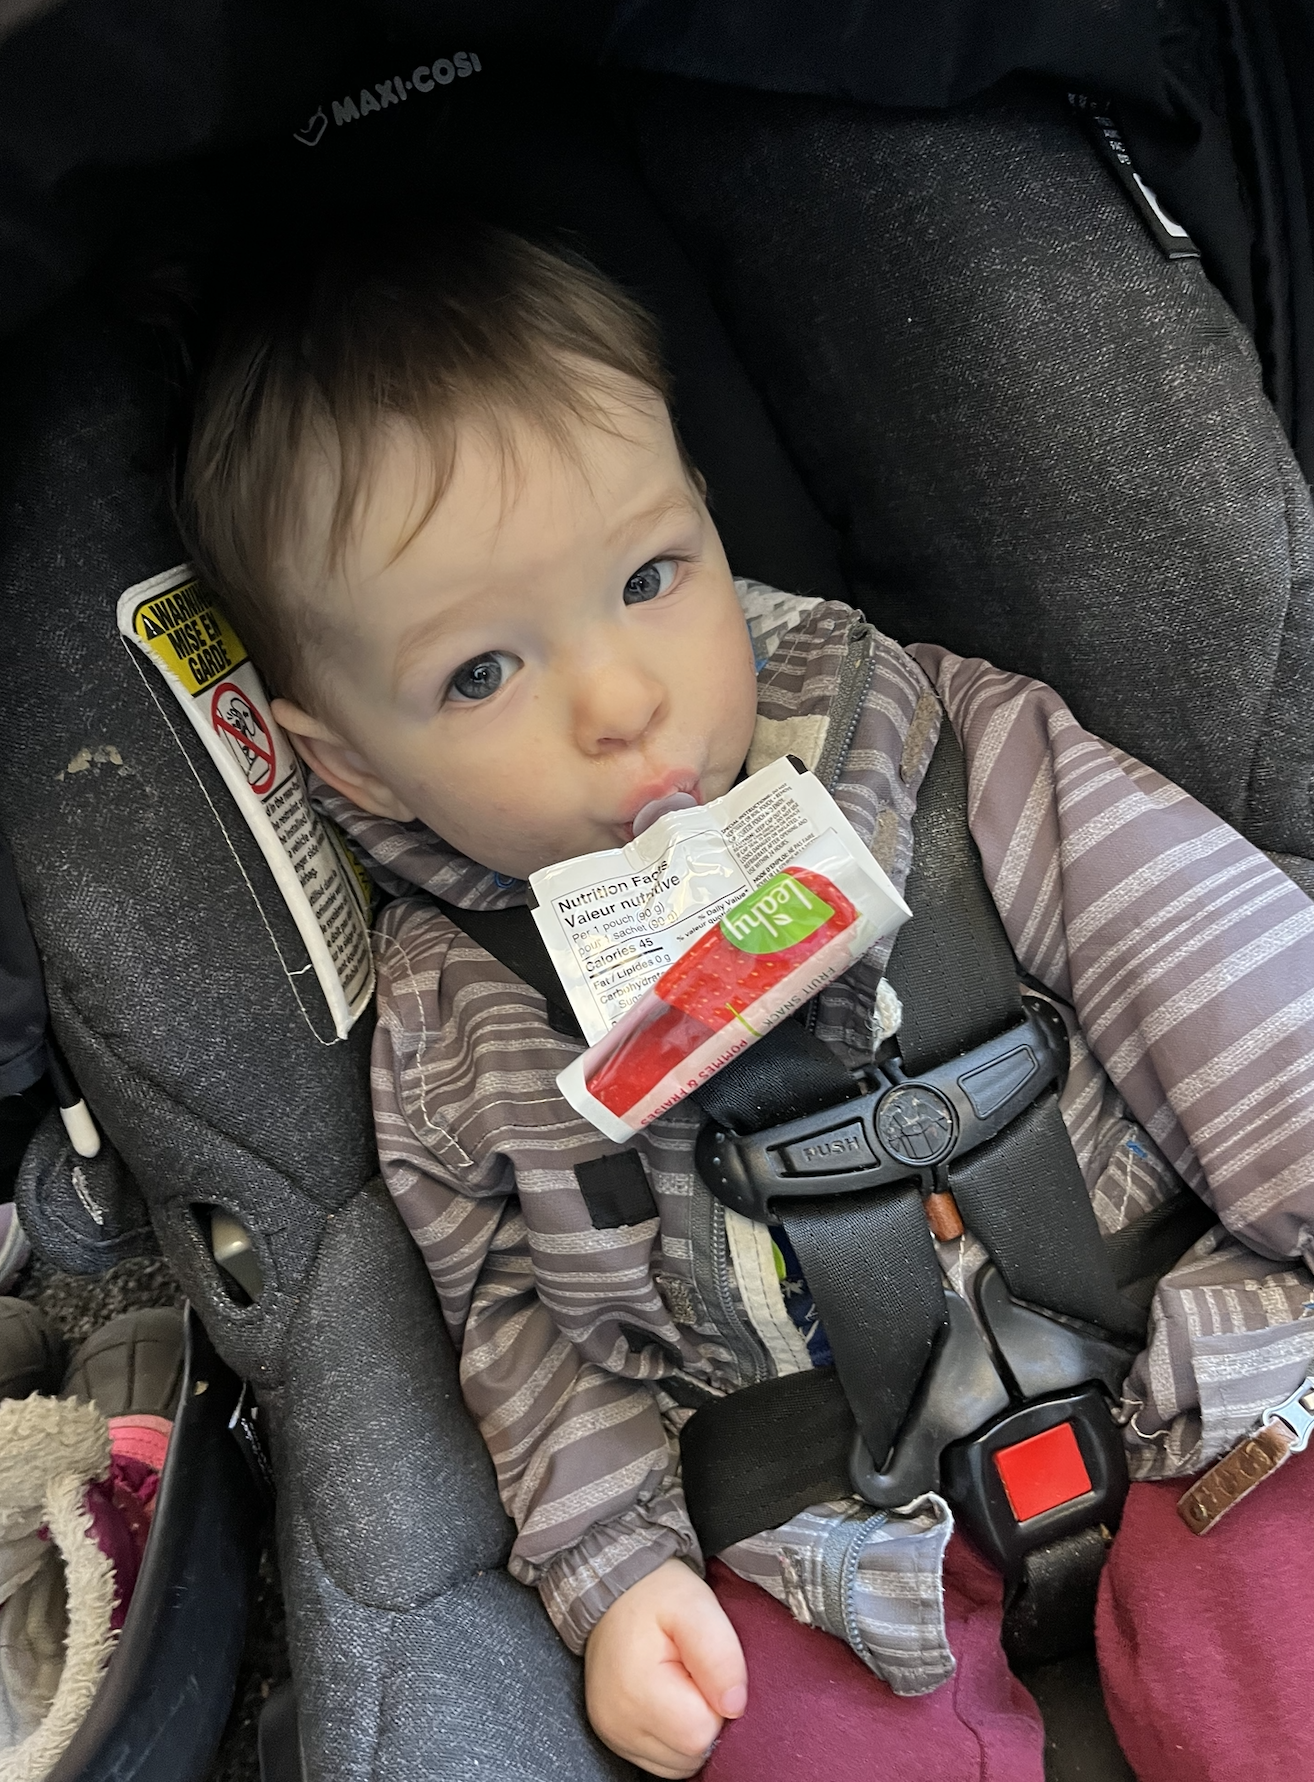 Toddler in a car seat holding a snack pouch, looking at the camera